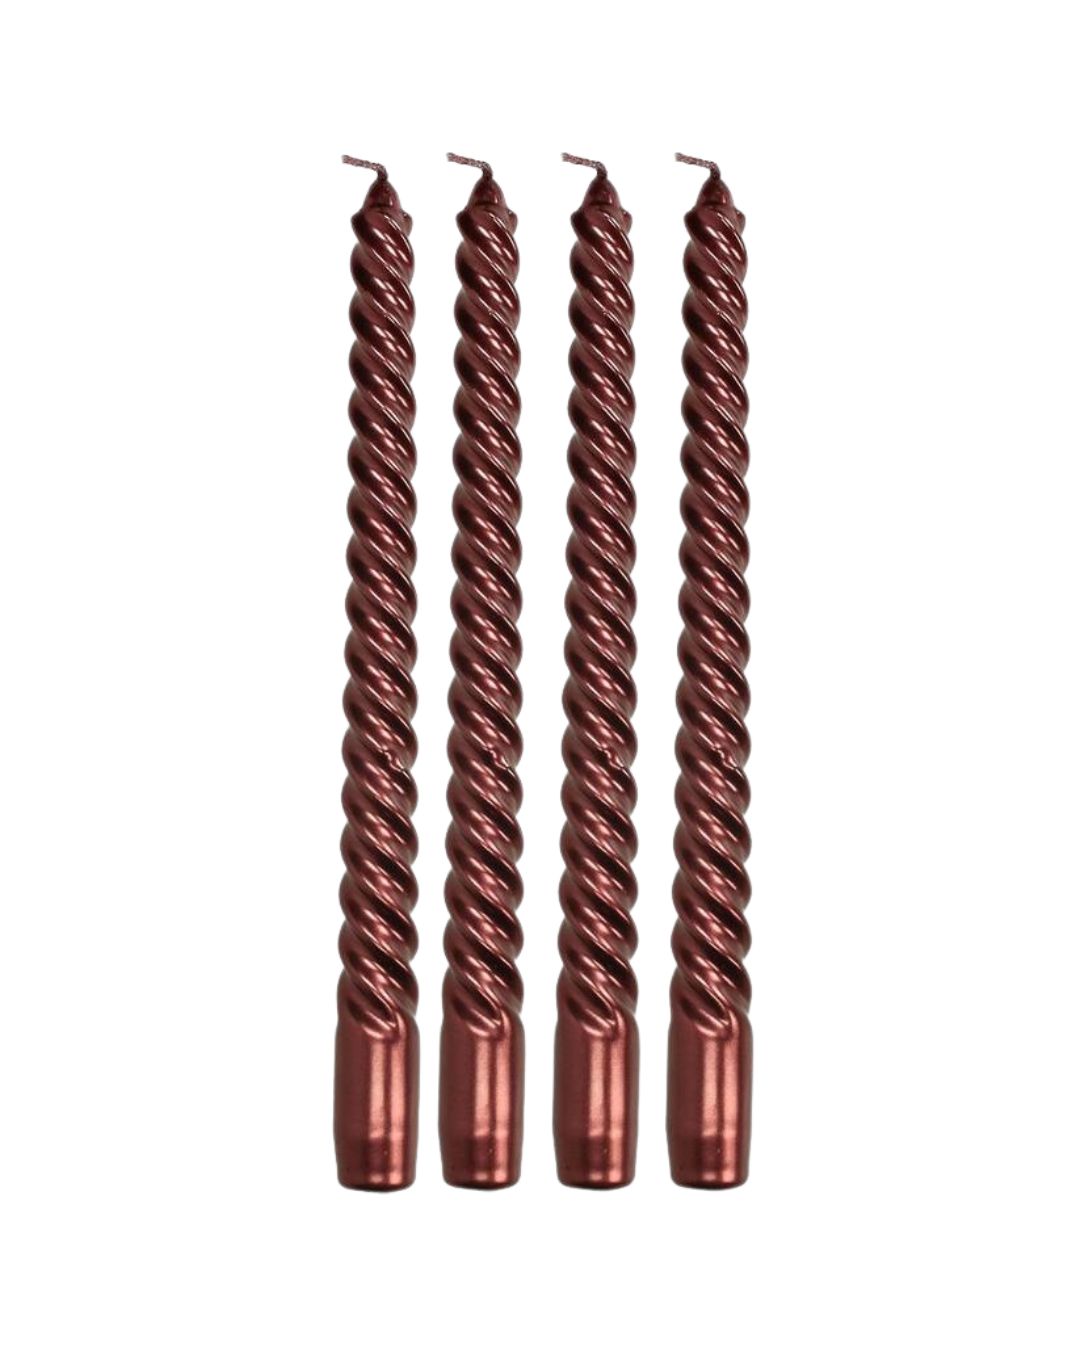 Twisted Candles - Burgundy (Box of 4)